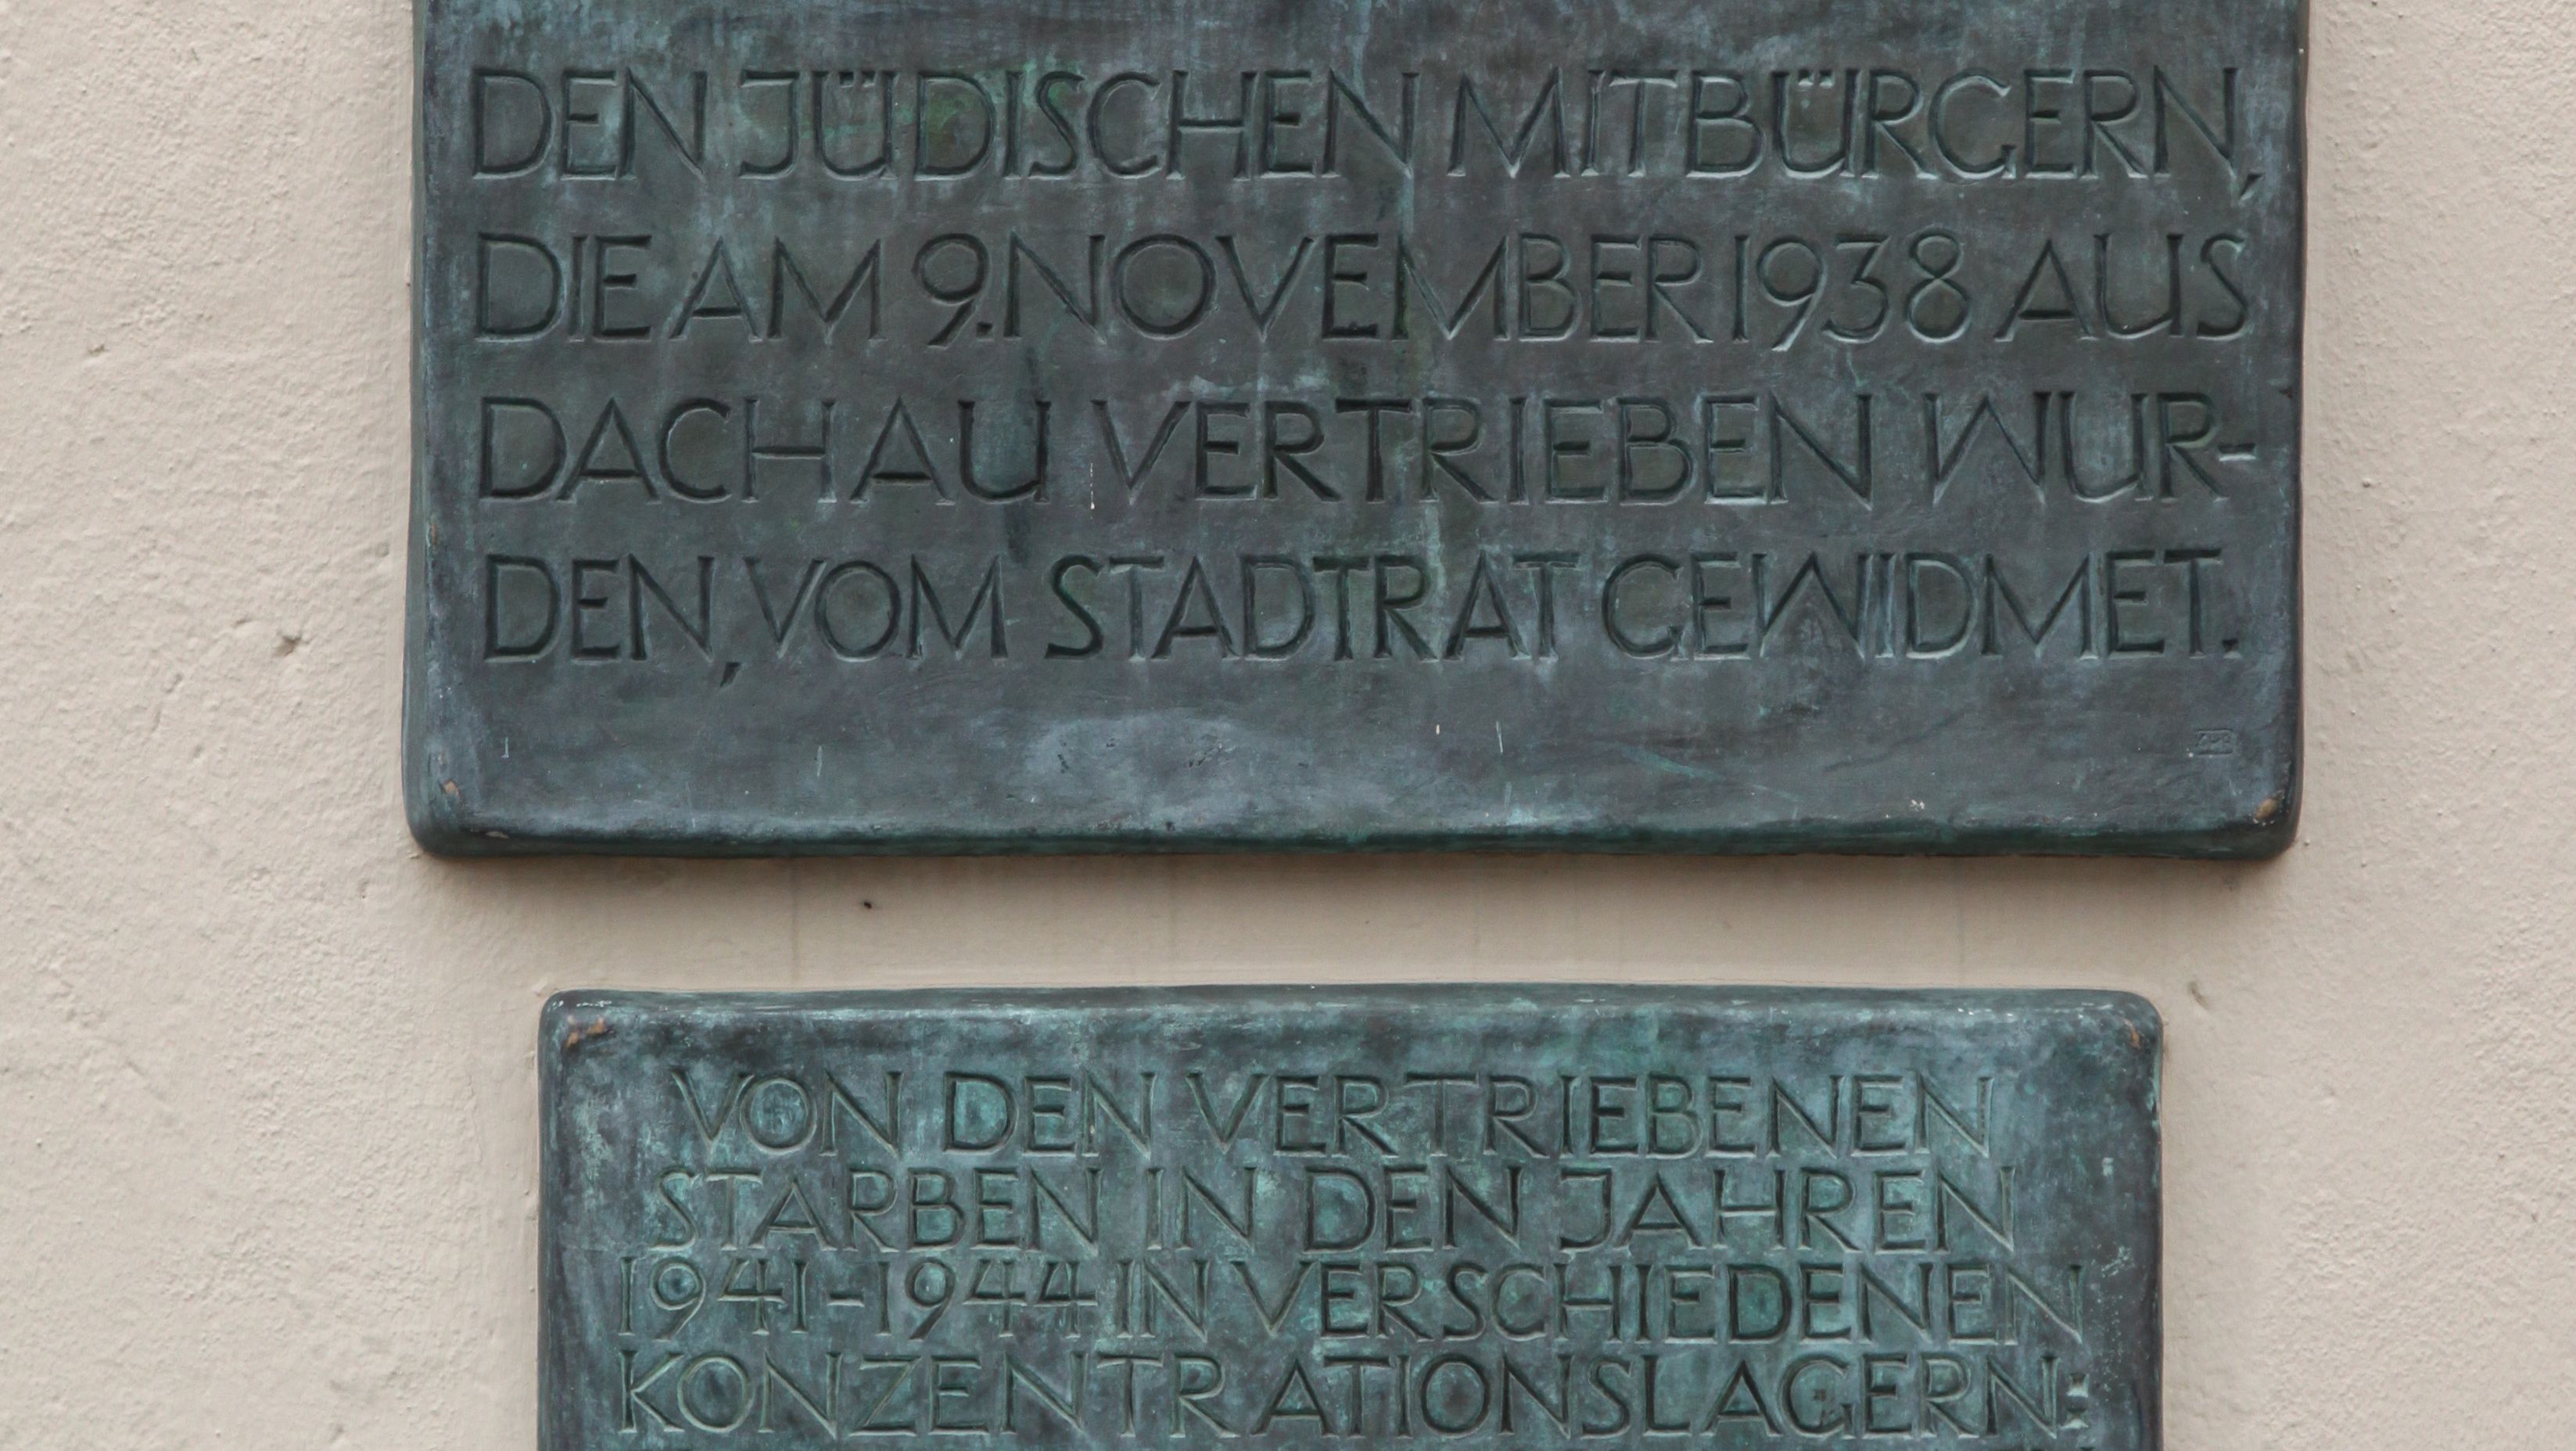 Photo of 2 memorial plaques at the Dachau town hall, inscription: Dedicated by the town council to the Jewish fellow citizens who were expelled from Dachau on 9 November 1938" and "Of the expellees died in the years 1941 - 1944 in the various concentration camps Julius Kohn, Max Wallach, Melly Wallach, Hans Neumeyer, Vera Neumeyer.